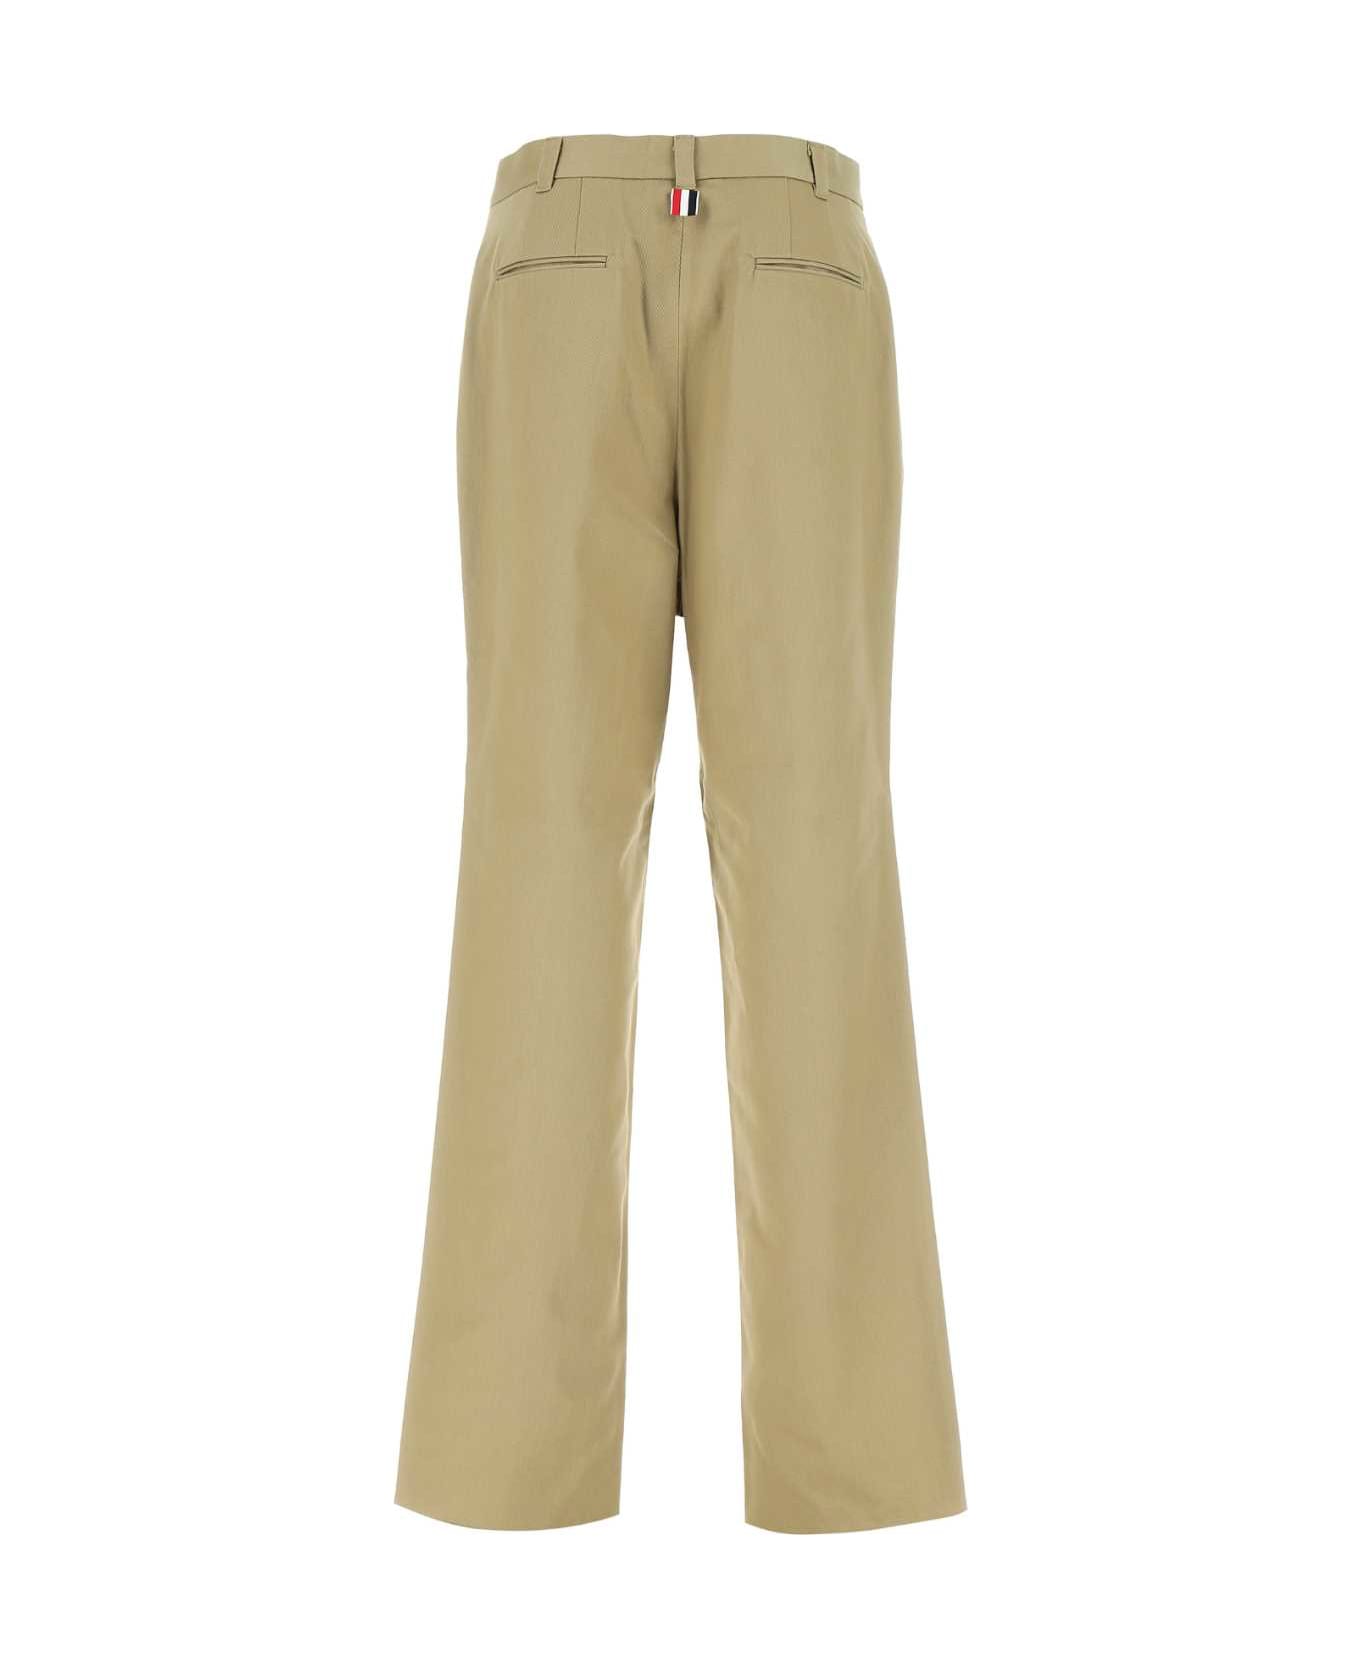 Thom Browne Cappuccino Cotton Pant - 280